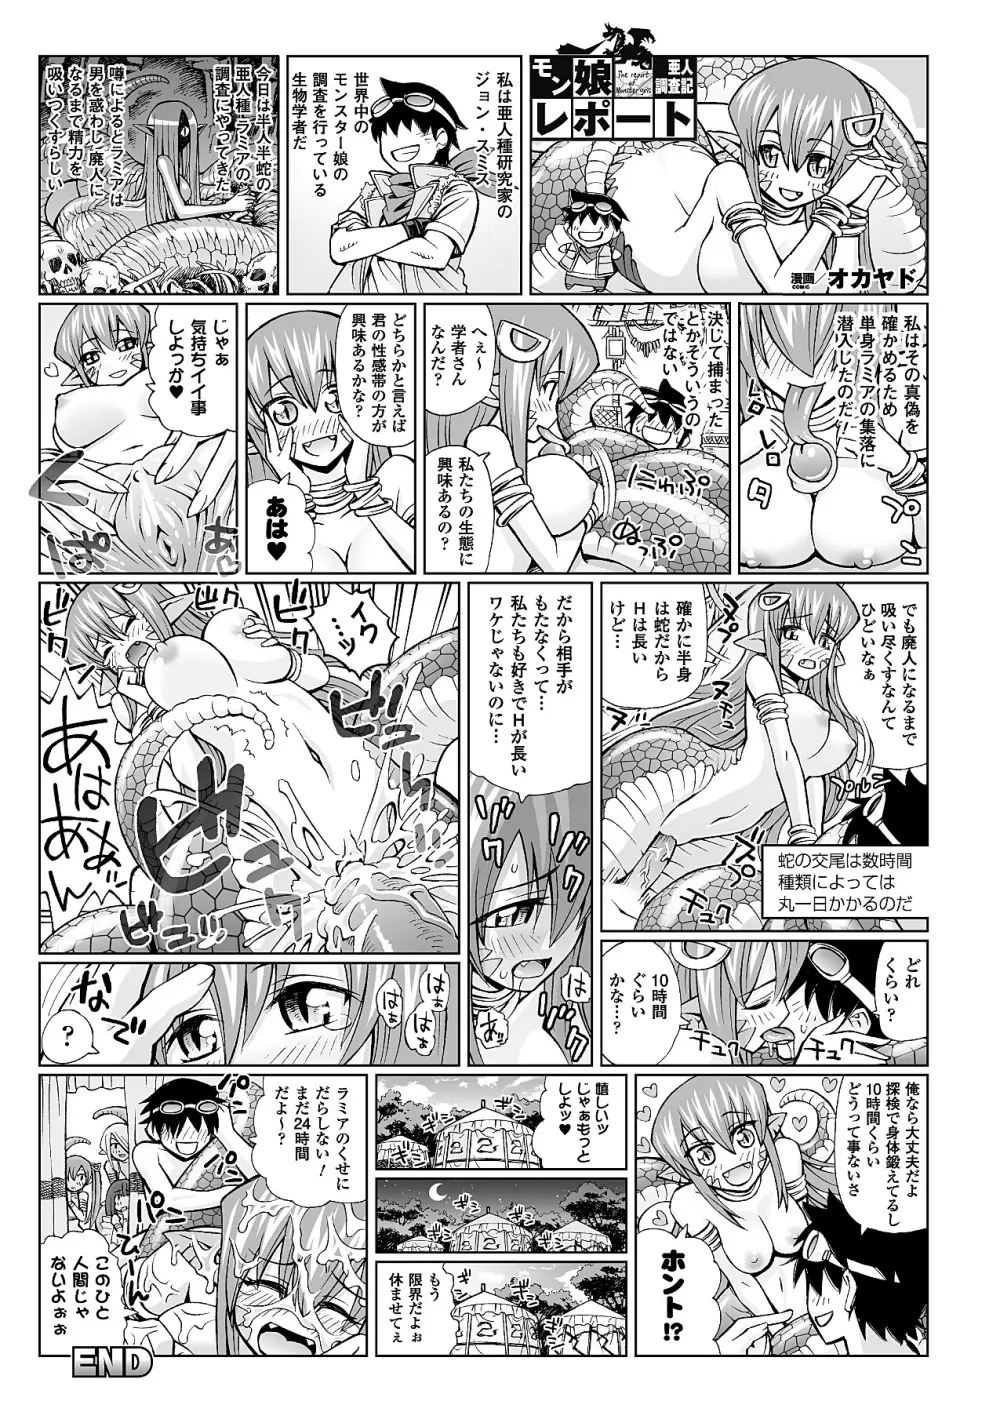 The Report of Monster Girls 01-05 Page.1